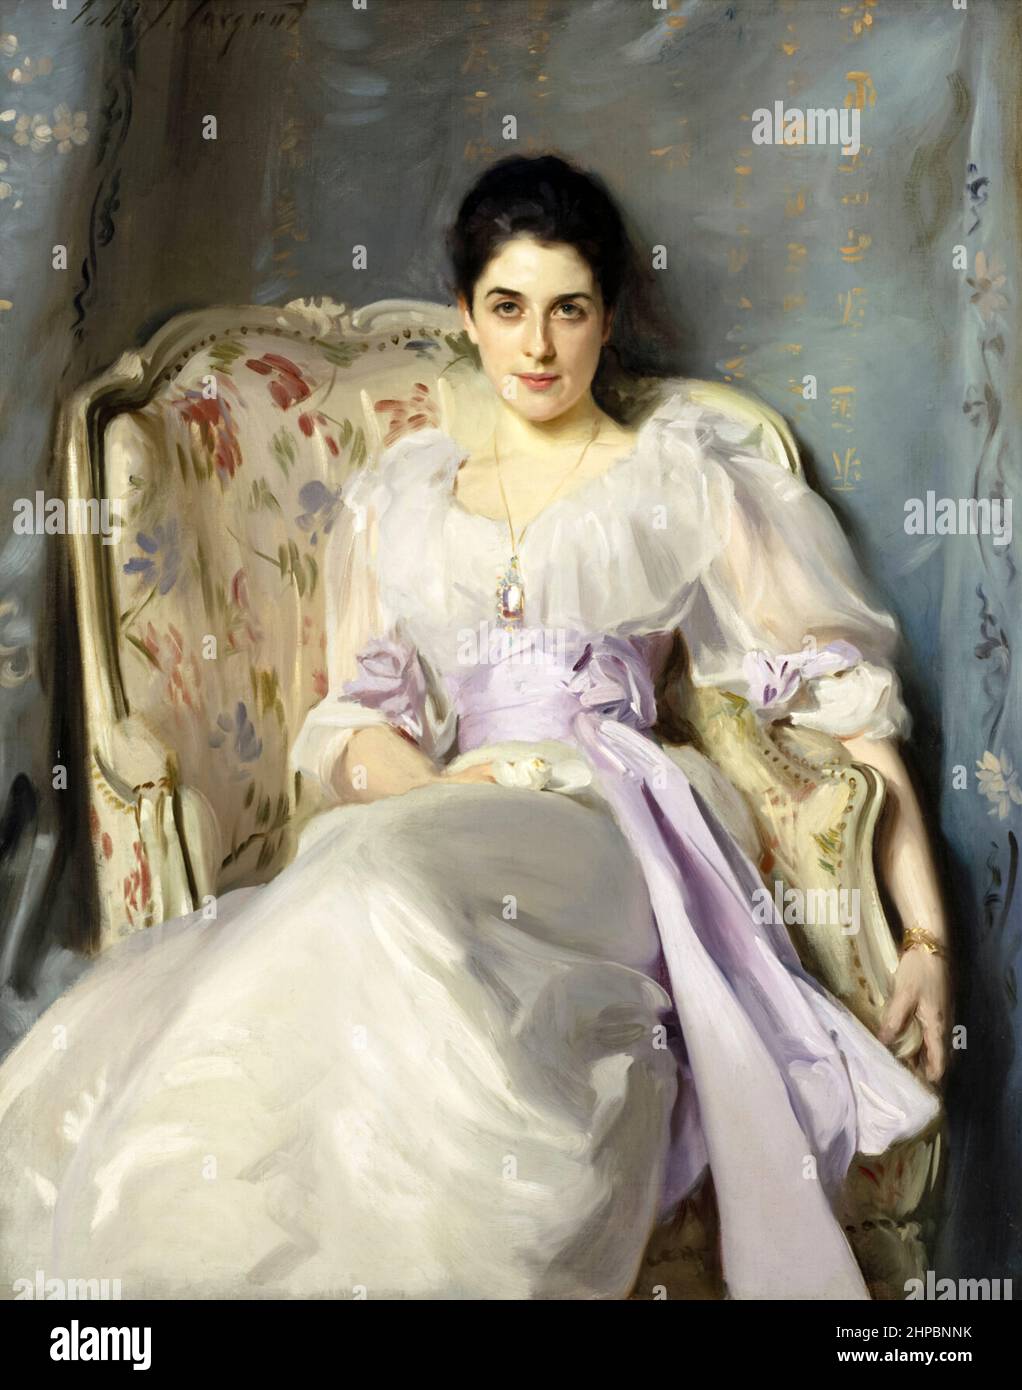 Lady Agnew of Lochnaw portrait by John Singer Sargent (1856-1925) painted in 1892. Stock Photo